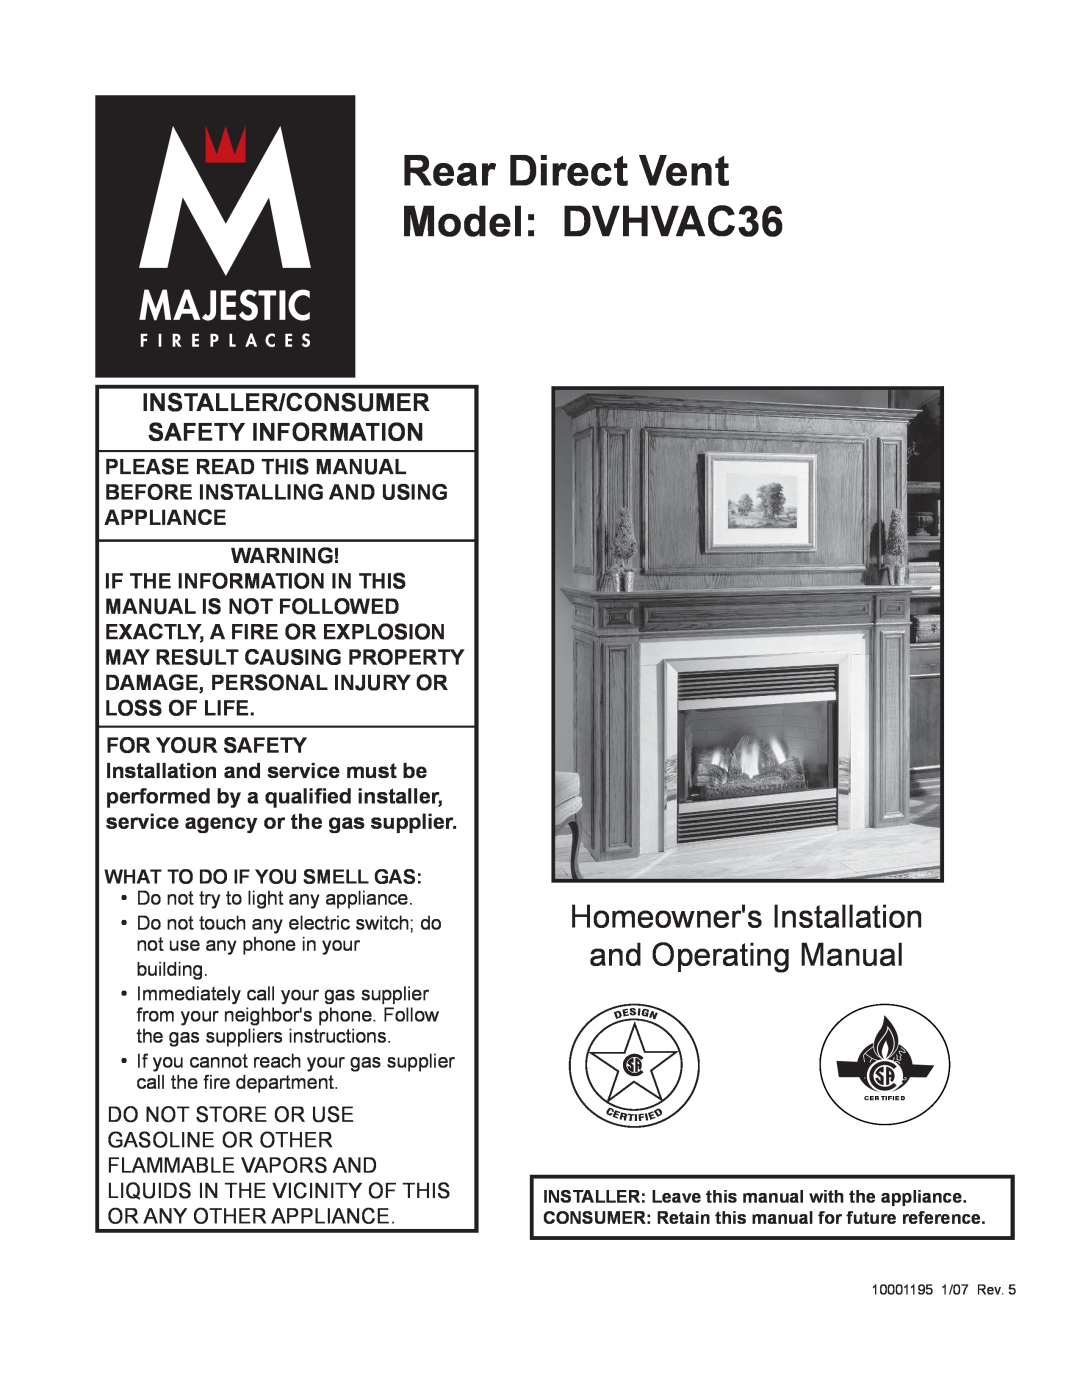 Vermont Casting manual Rear Direct Vent Model DVHVAC36, Homeowners Installation and Operating Manual 